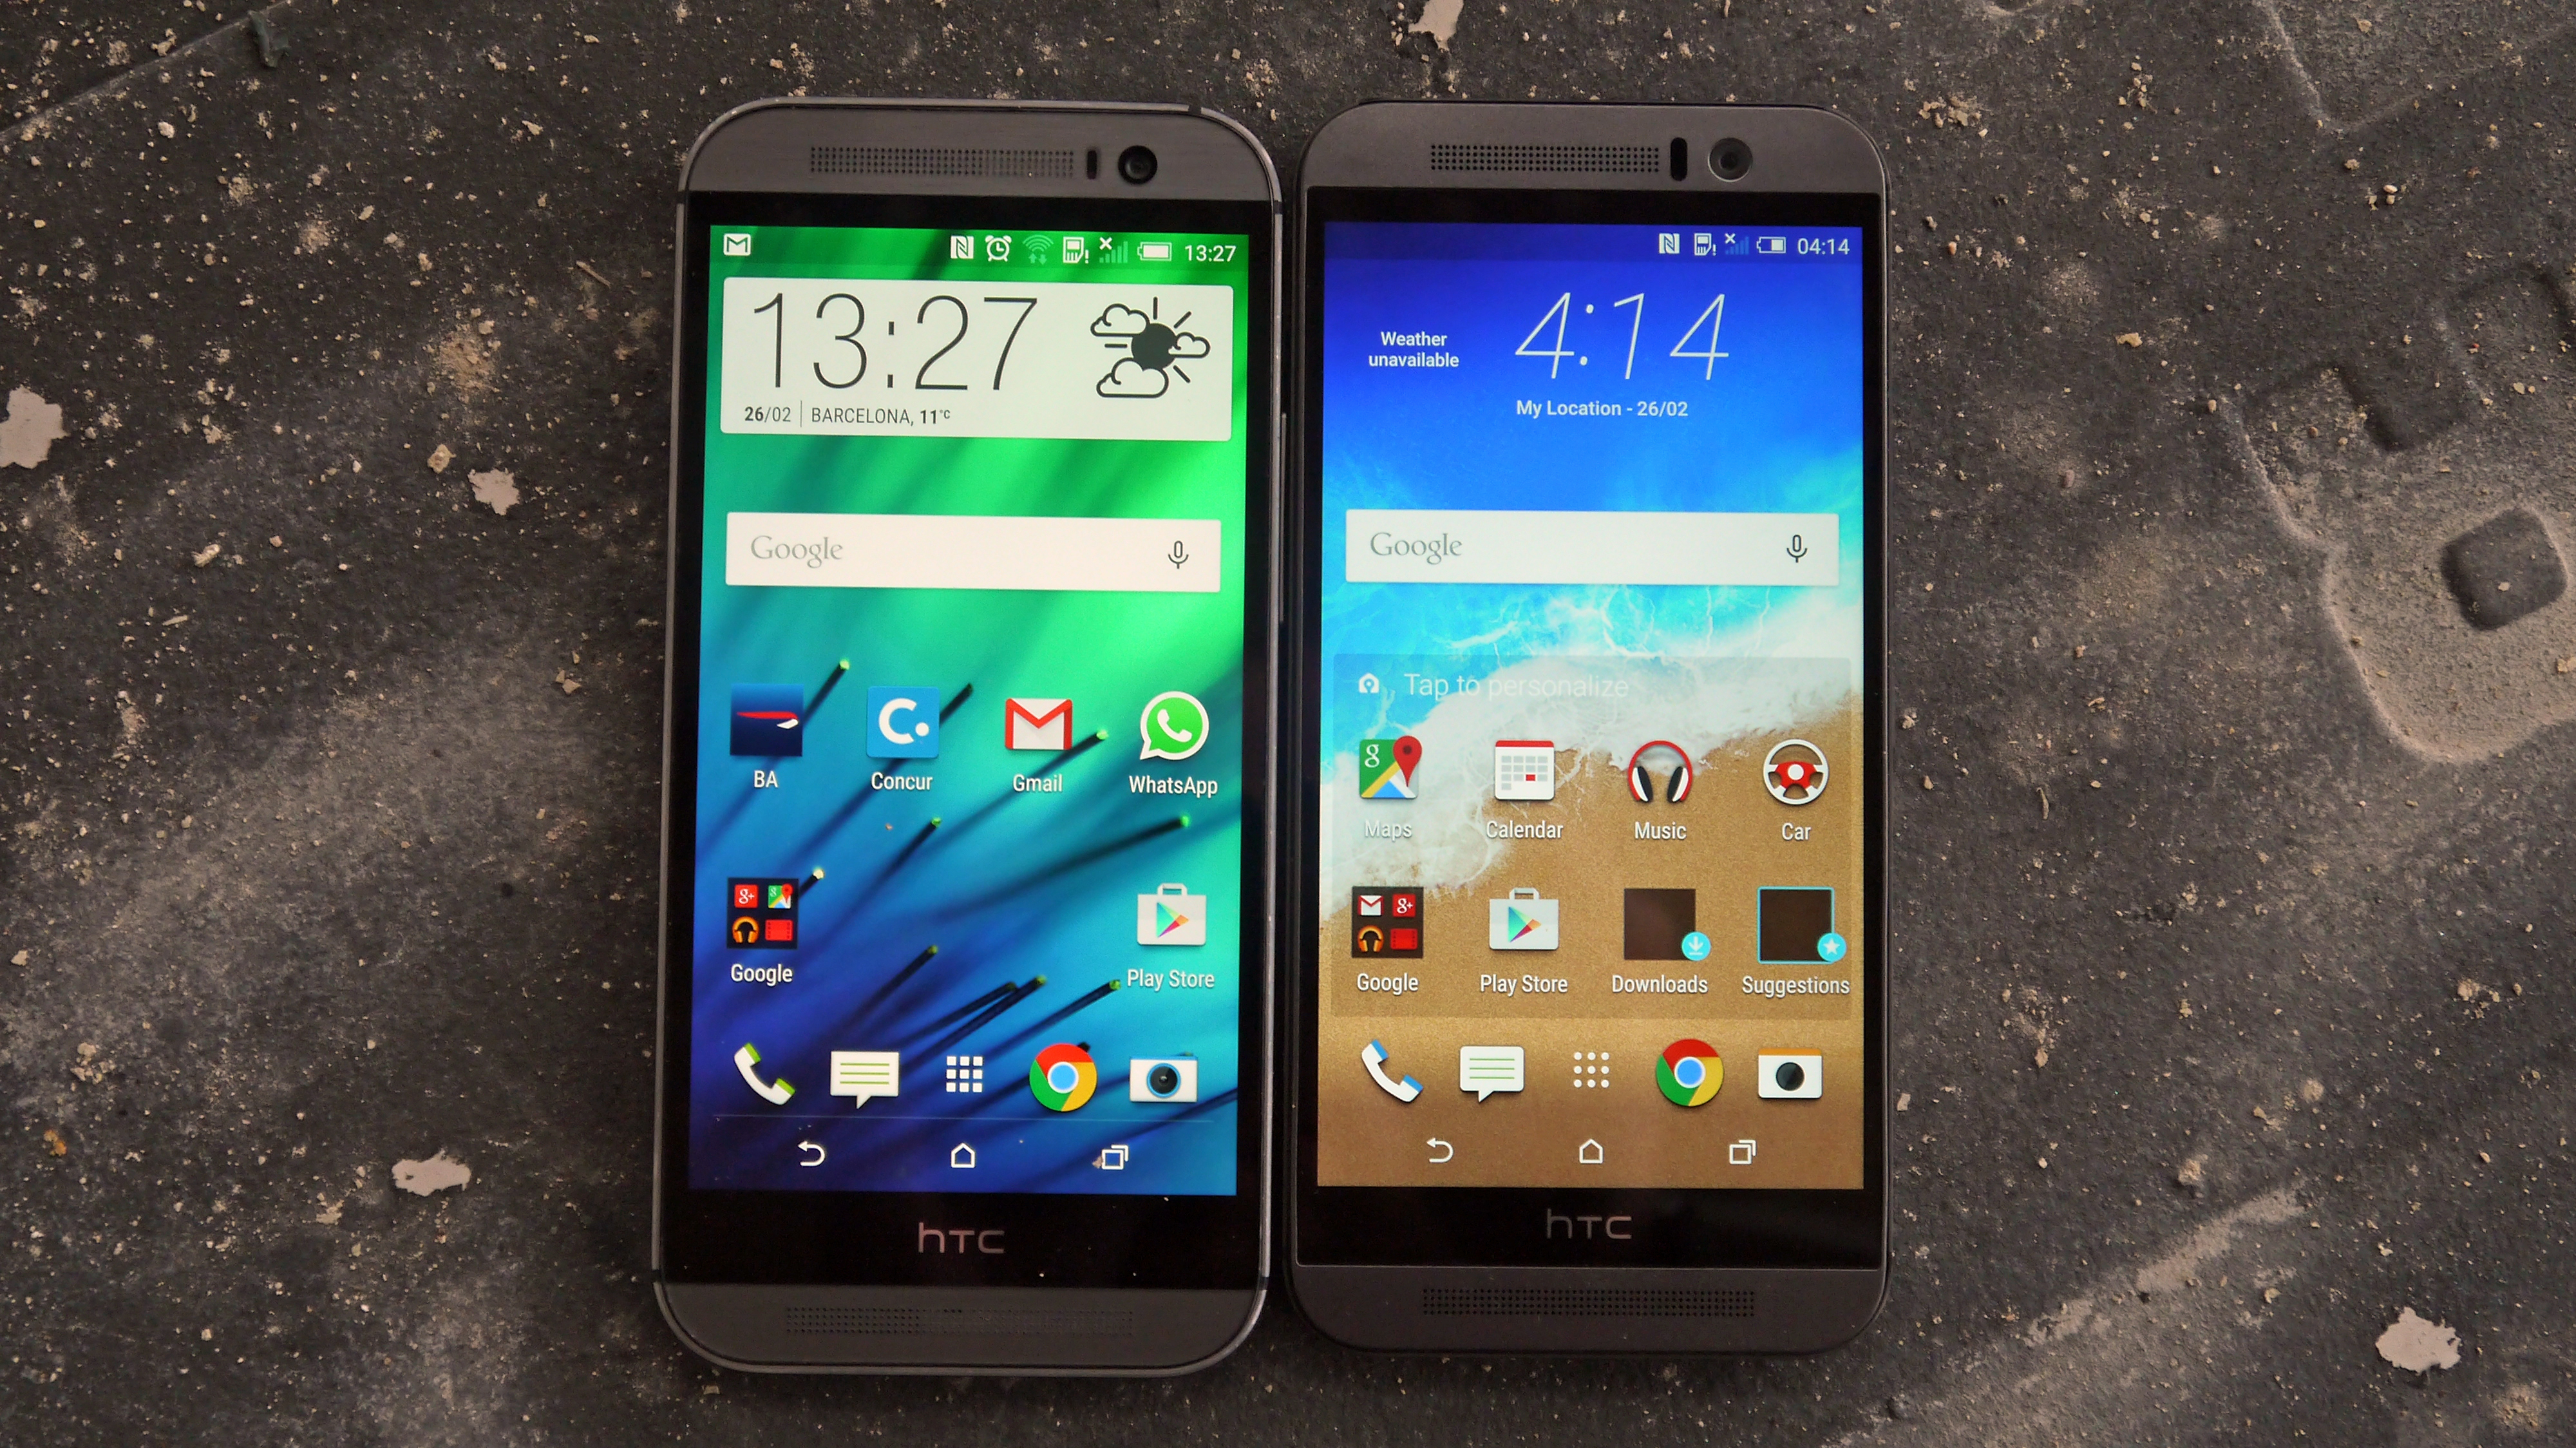 HTC One M8 and One M9 are still the most demanding Android Smartphones